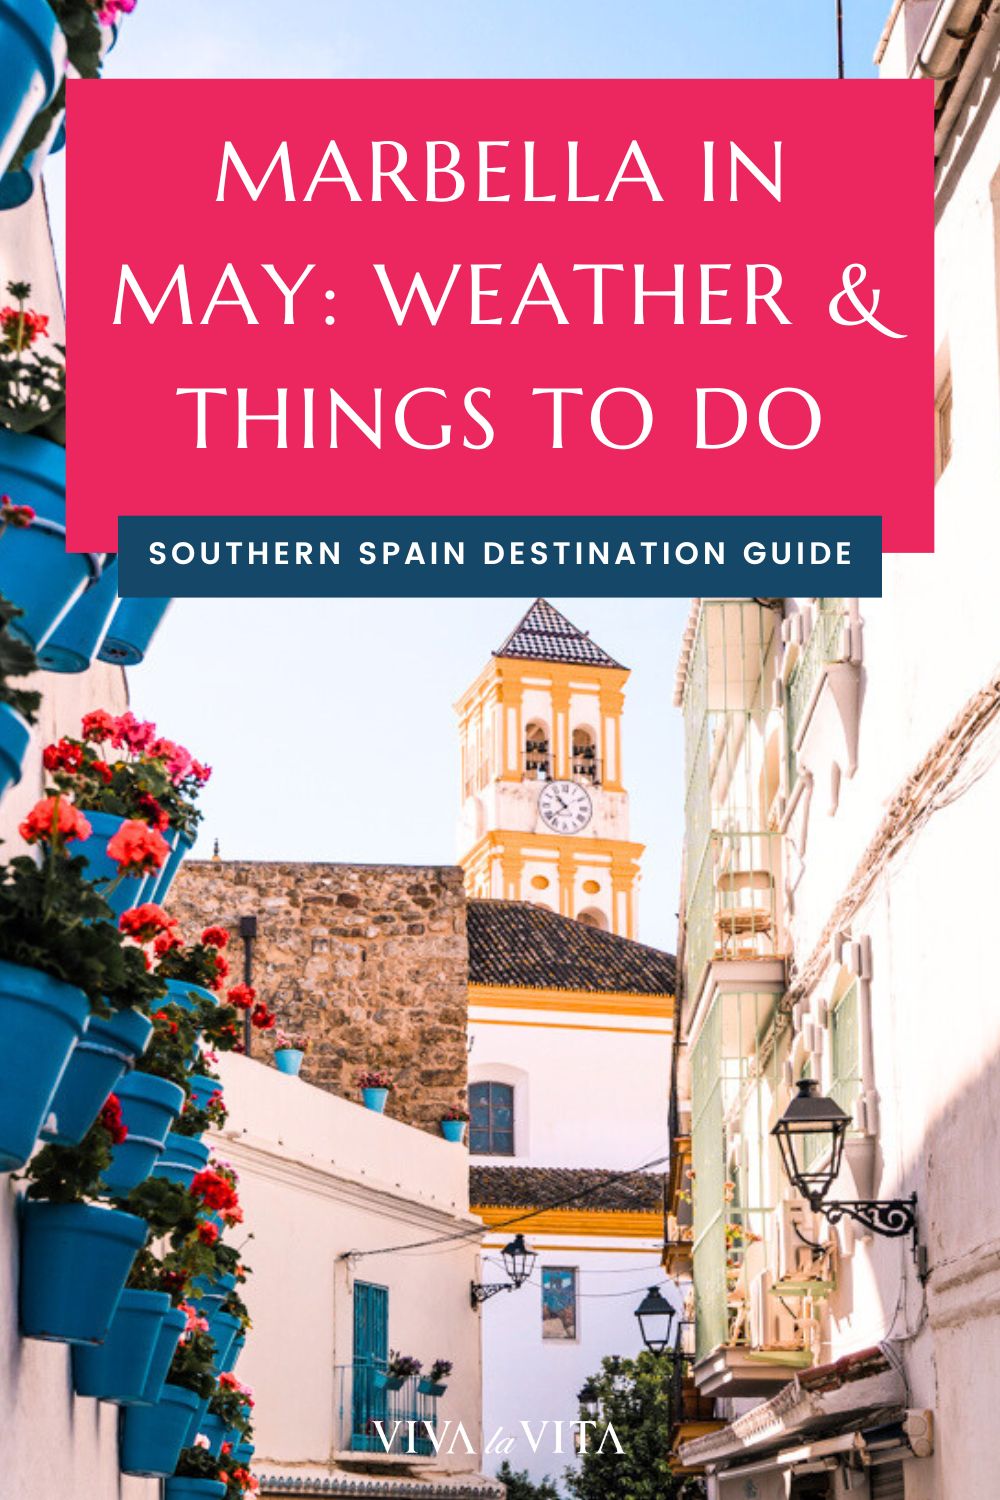 pinterest image showing a street in old town of Marbella with a church and headline - marbella weather in may, weather and things to do.